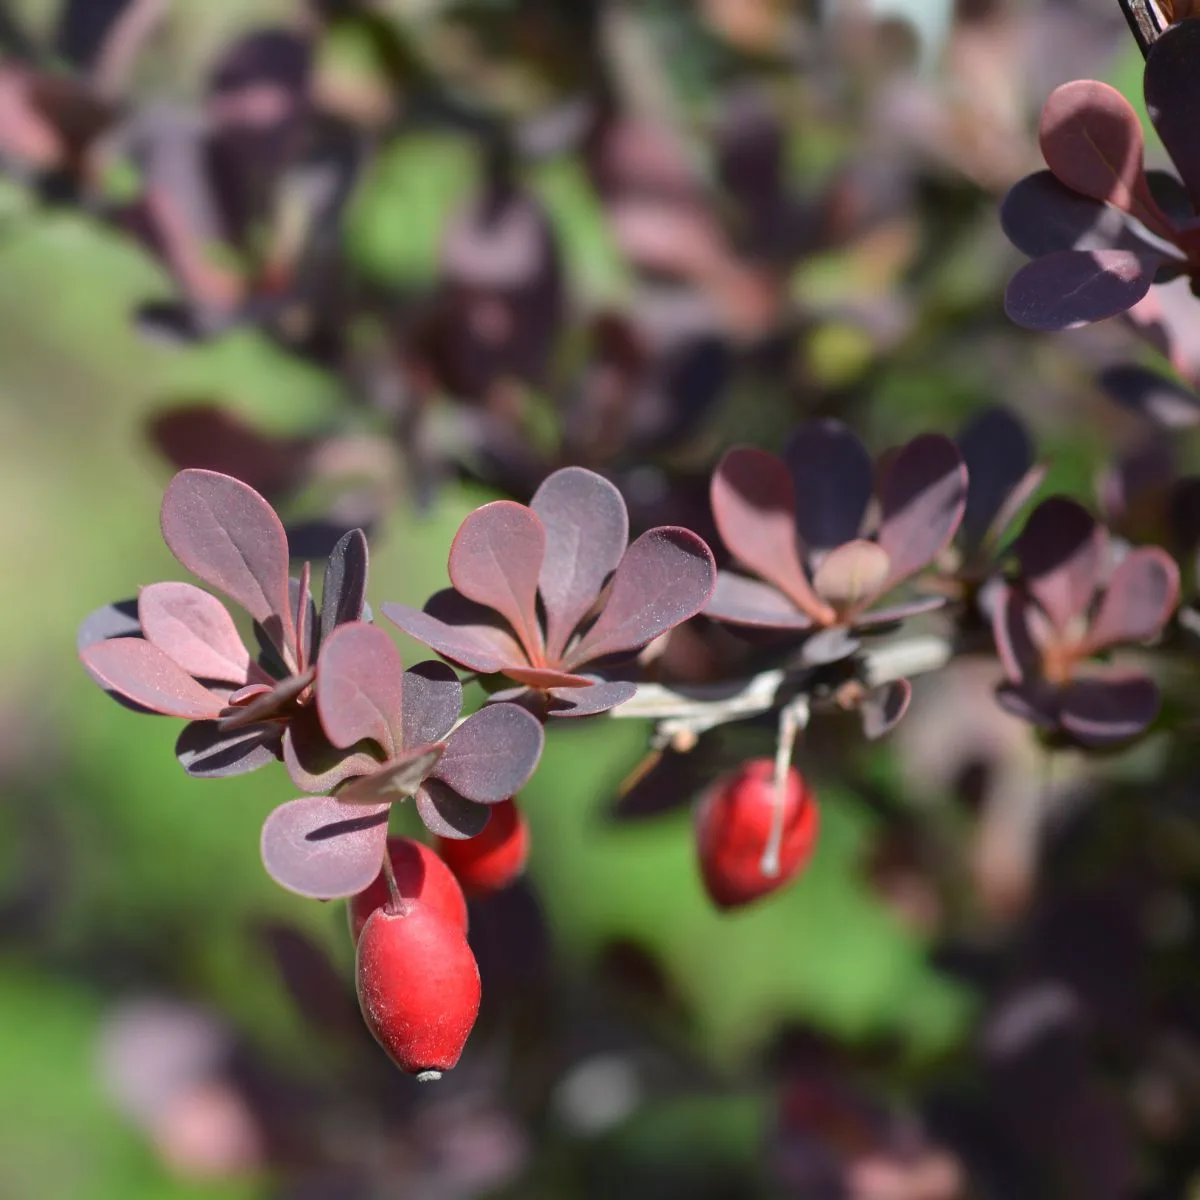 Japanese barberry with red fruits